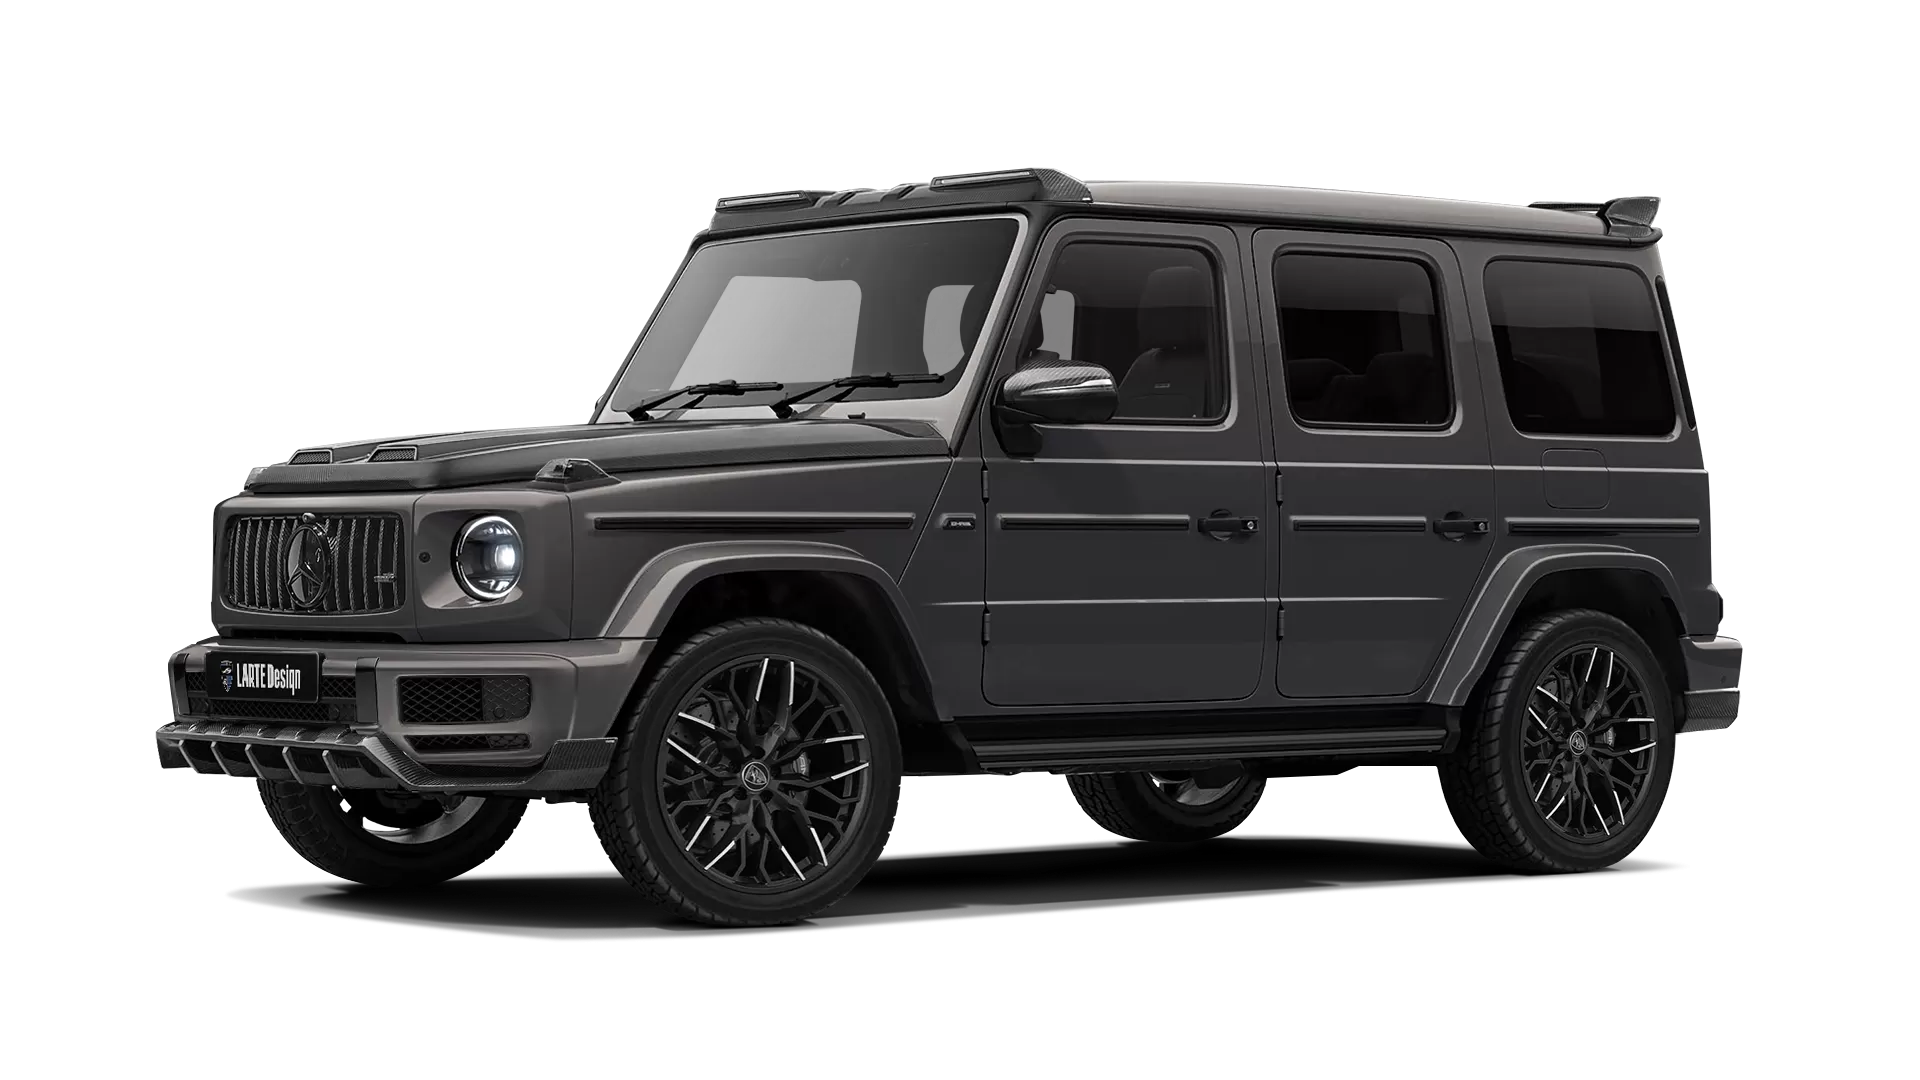 Mercedes G class W463 with carbon body kit: front view shown in Indium Grey